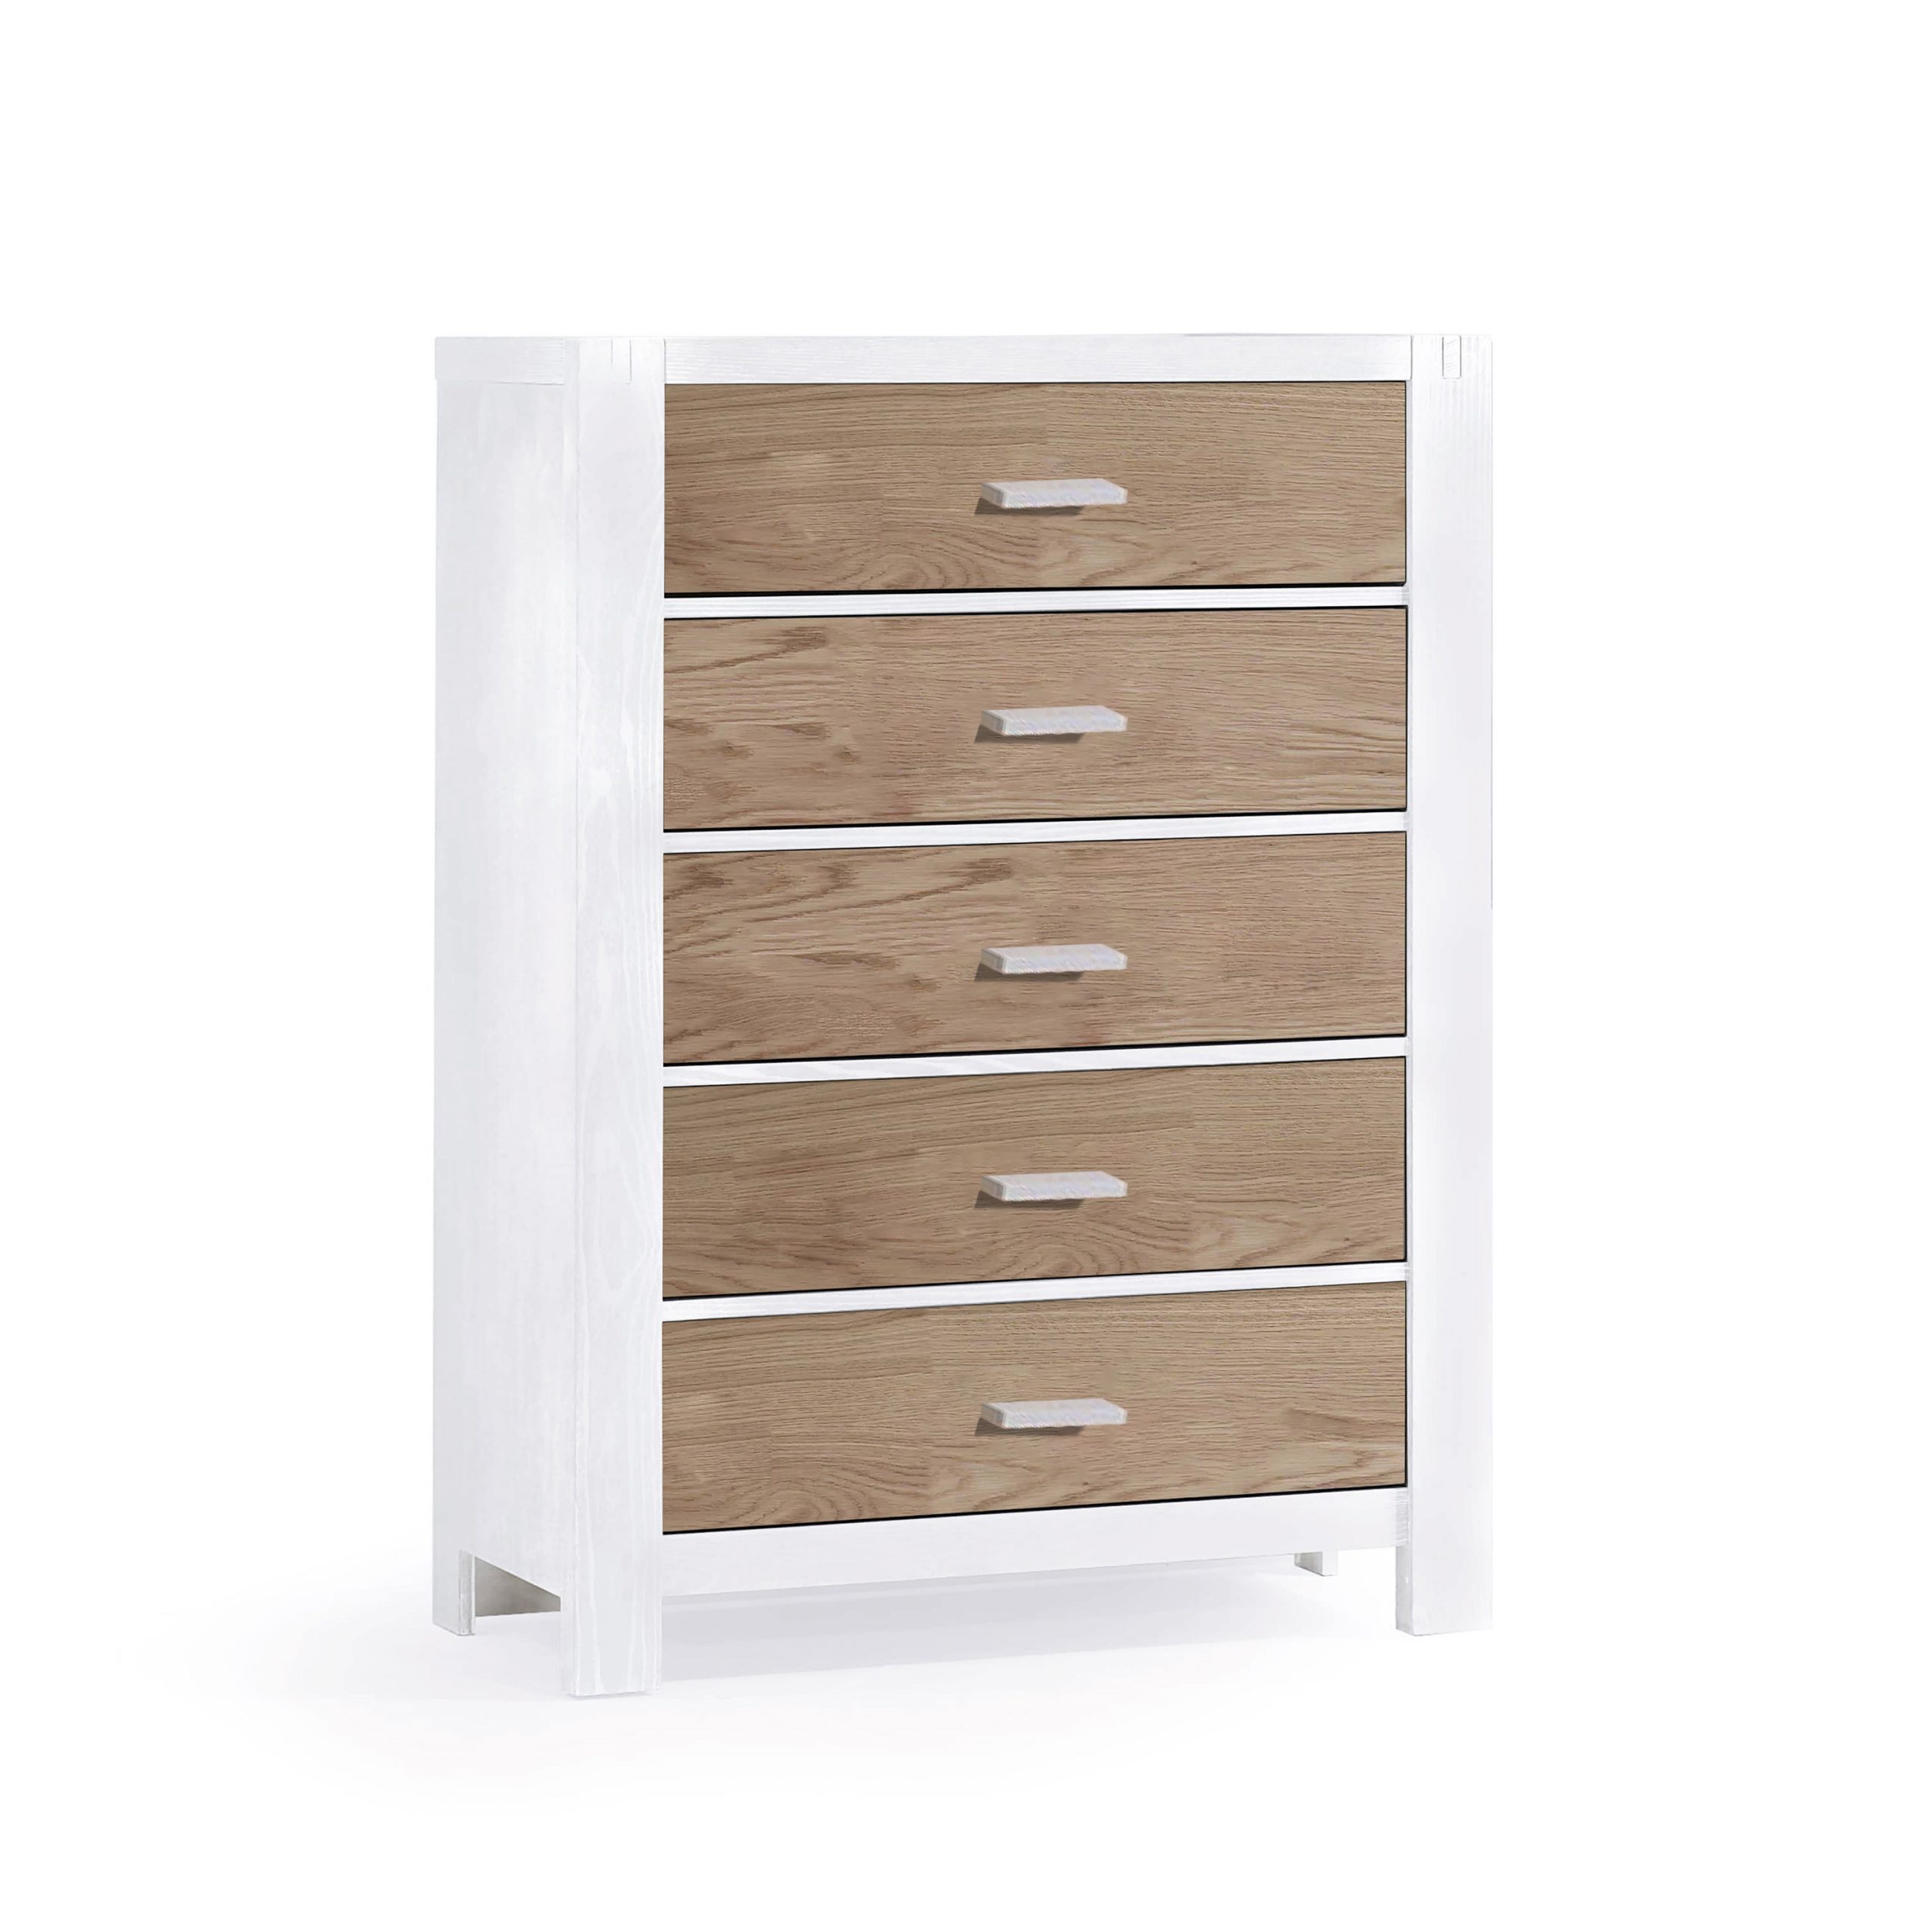 Rustico Moderno 5 Drawer Dresser in White and Natural Oak